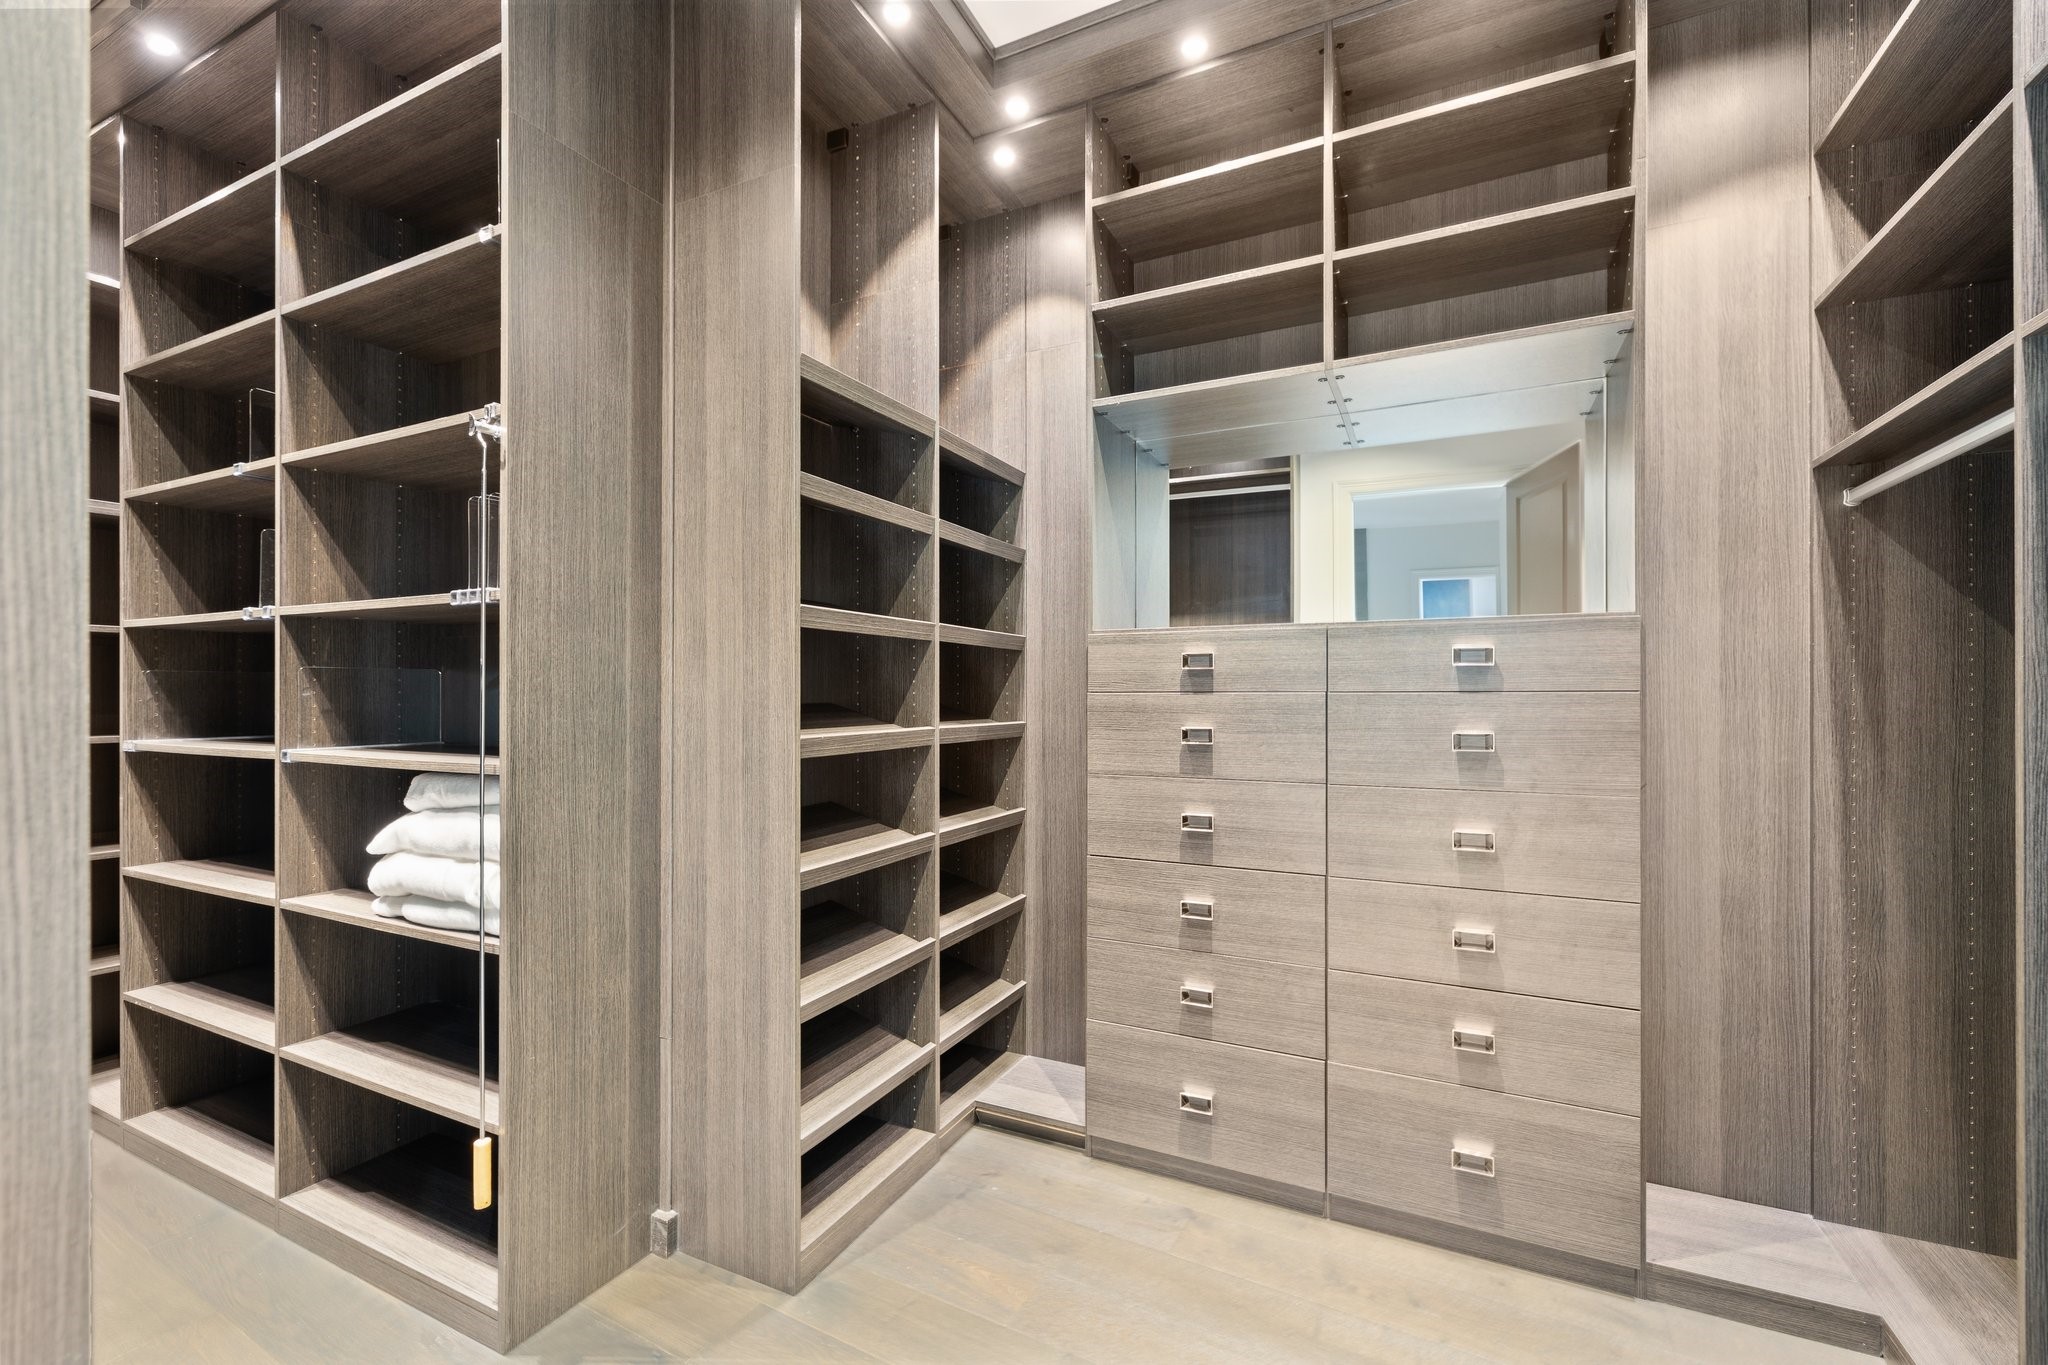 Sophisticated custom California closet in the primary bedroom, showcasing elegant wood finishes, multi-tiered shelving, and ample drawer space for optimal organization.